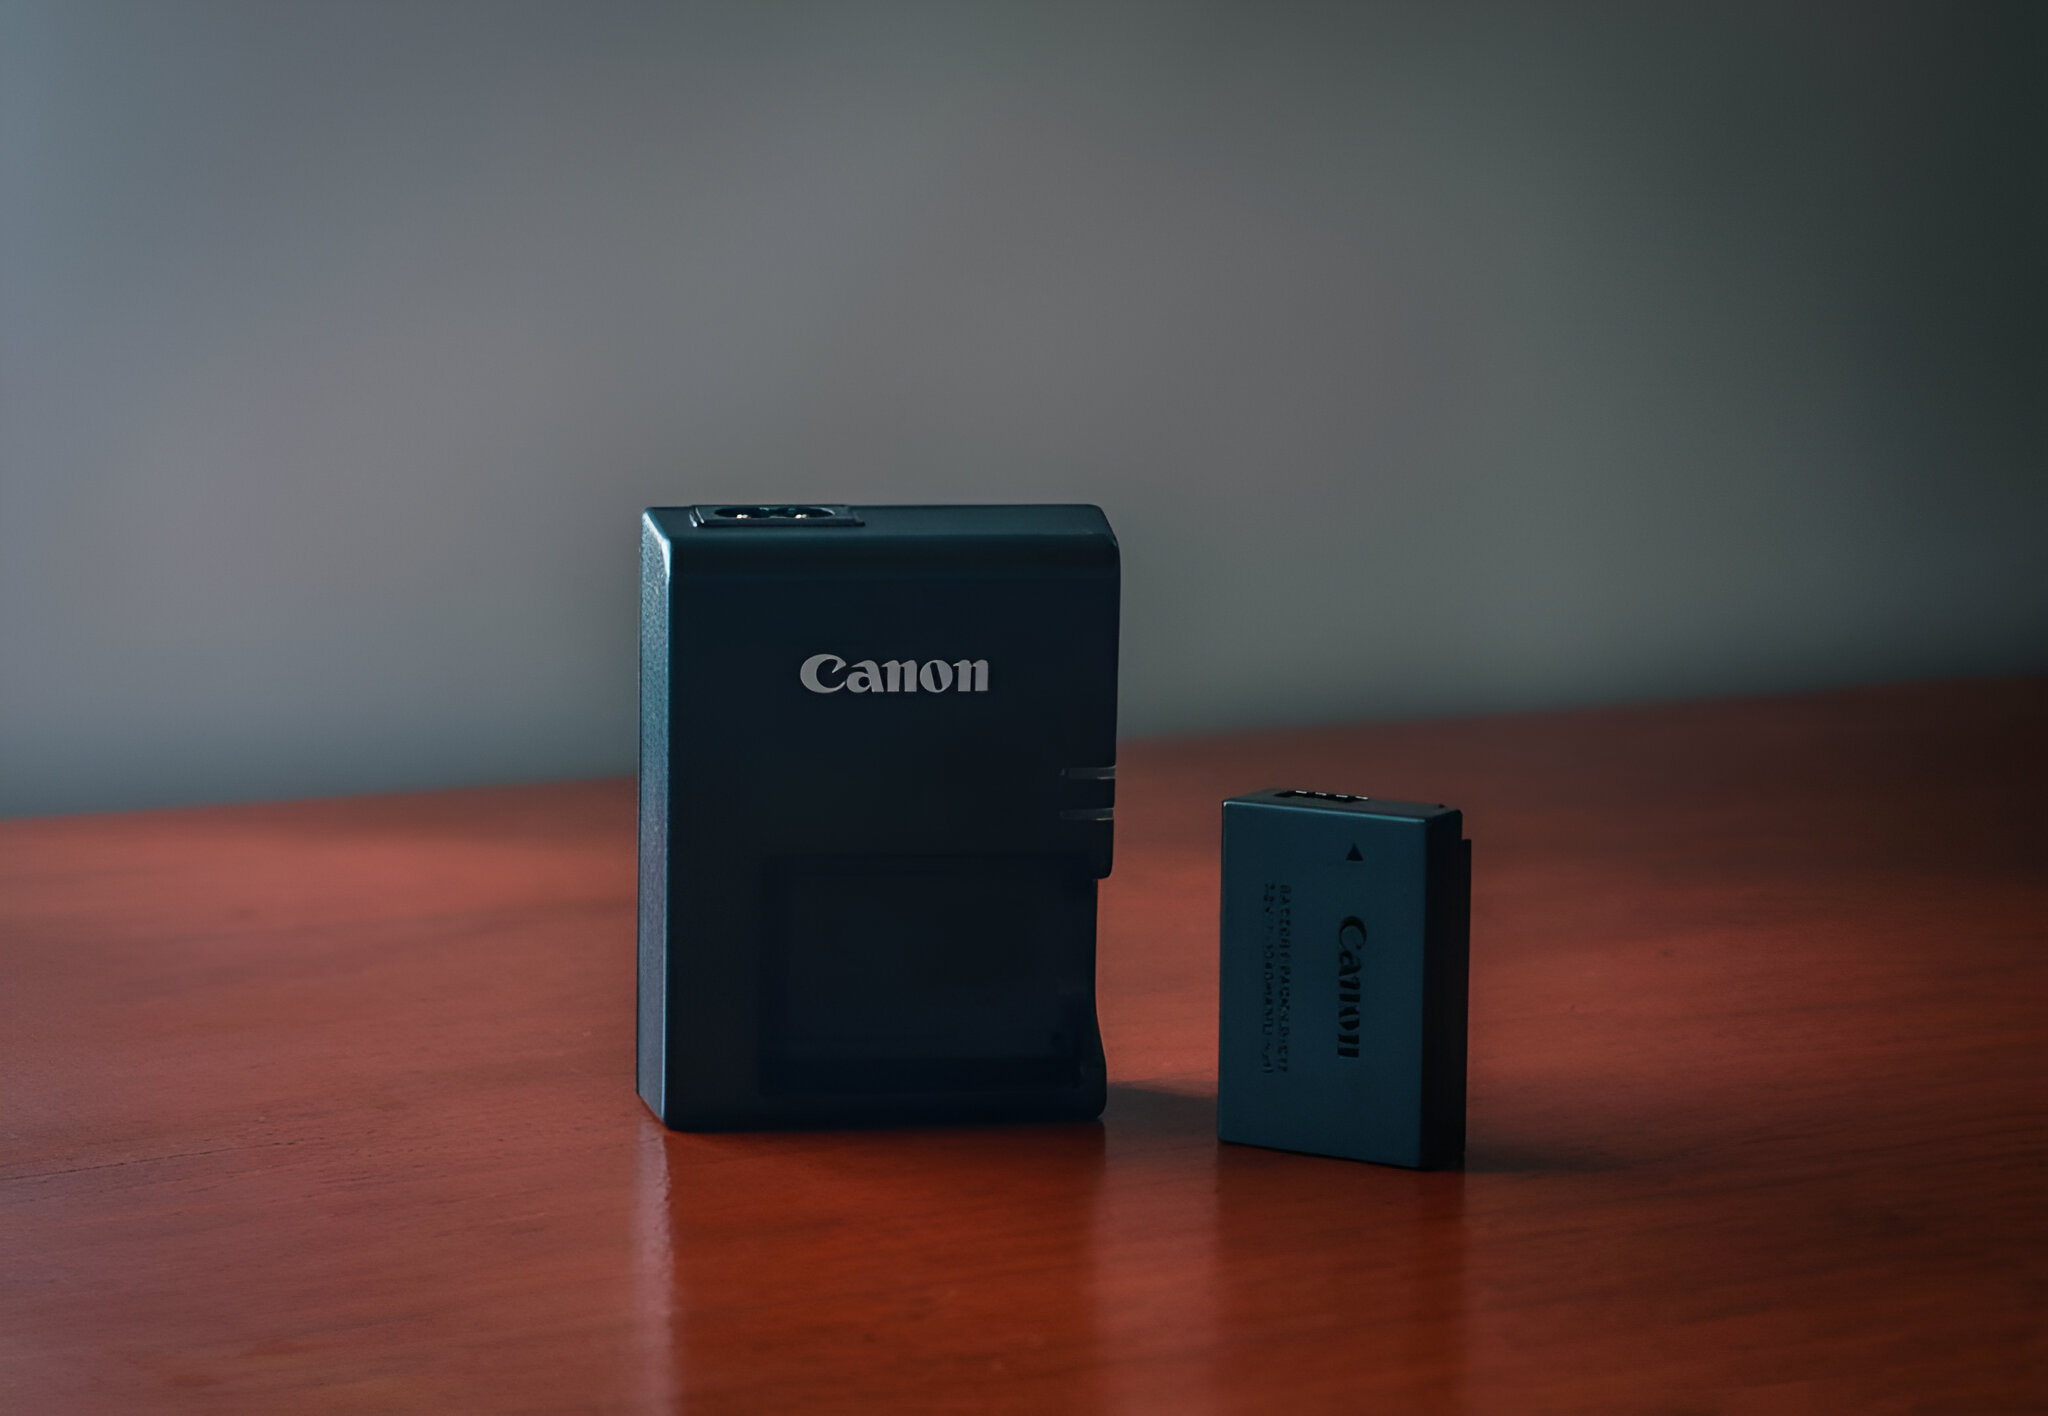 How To Charge A Canon Camcorder Battery Without A Charger